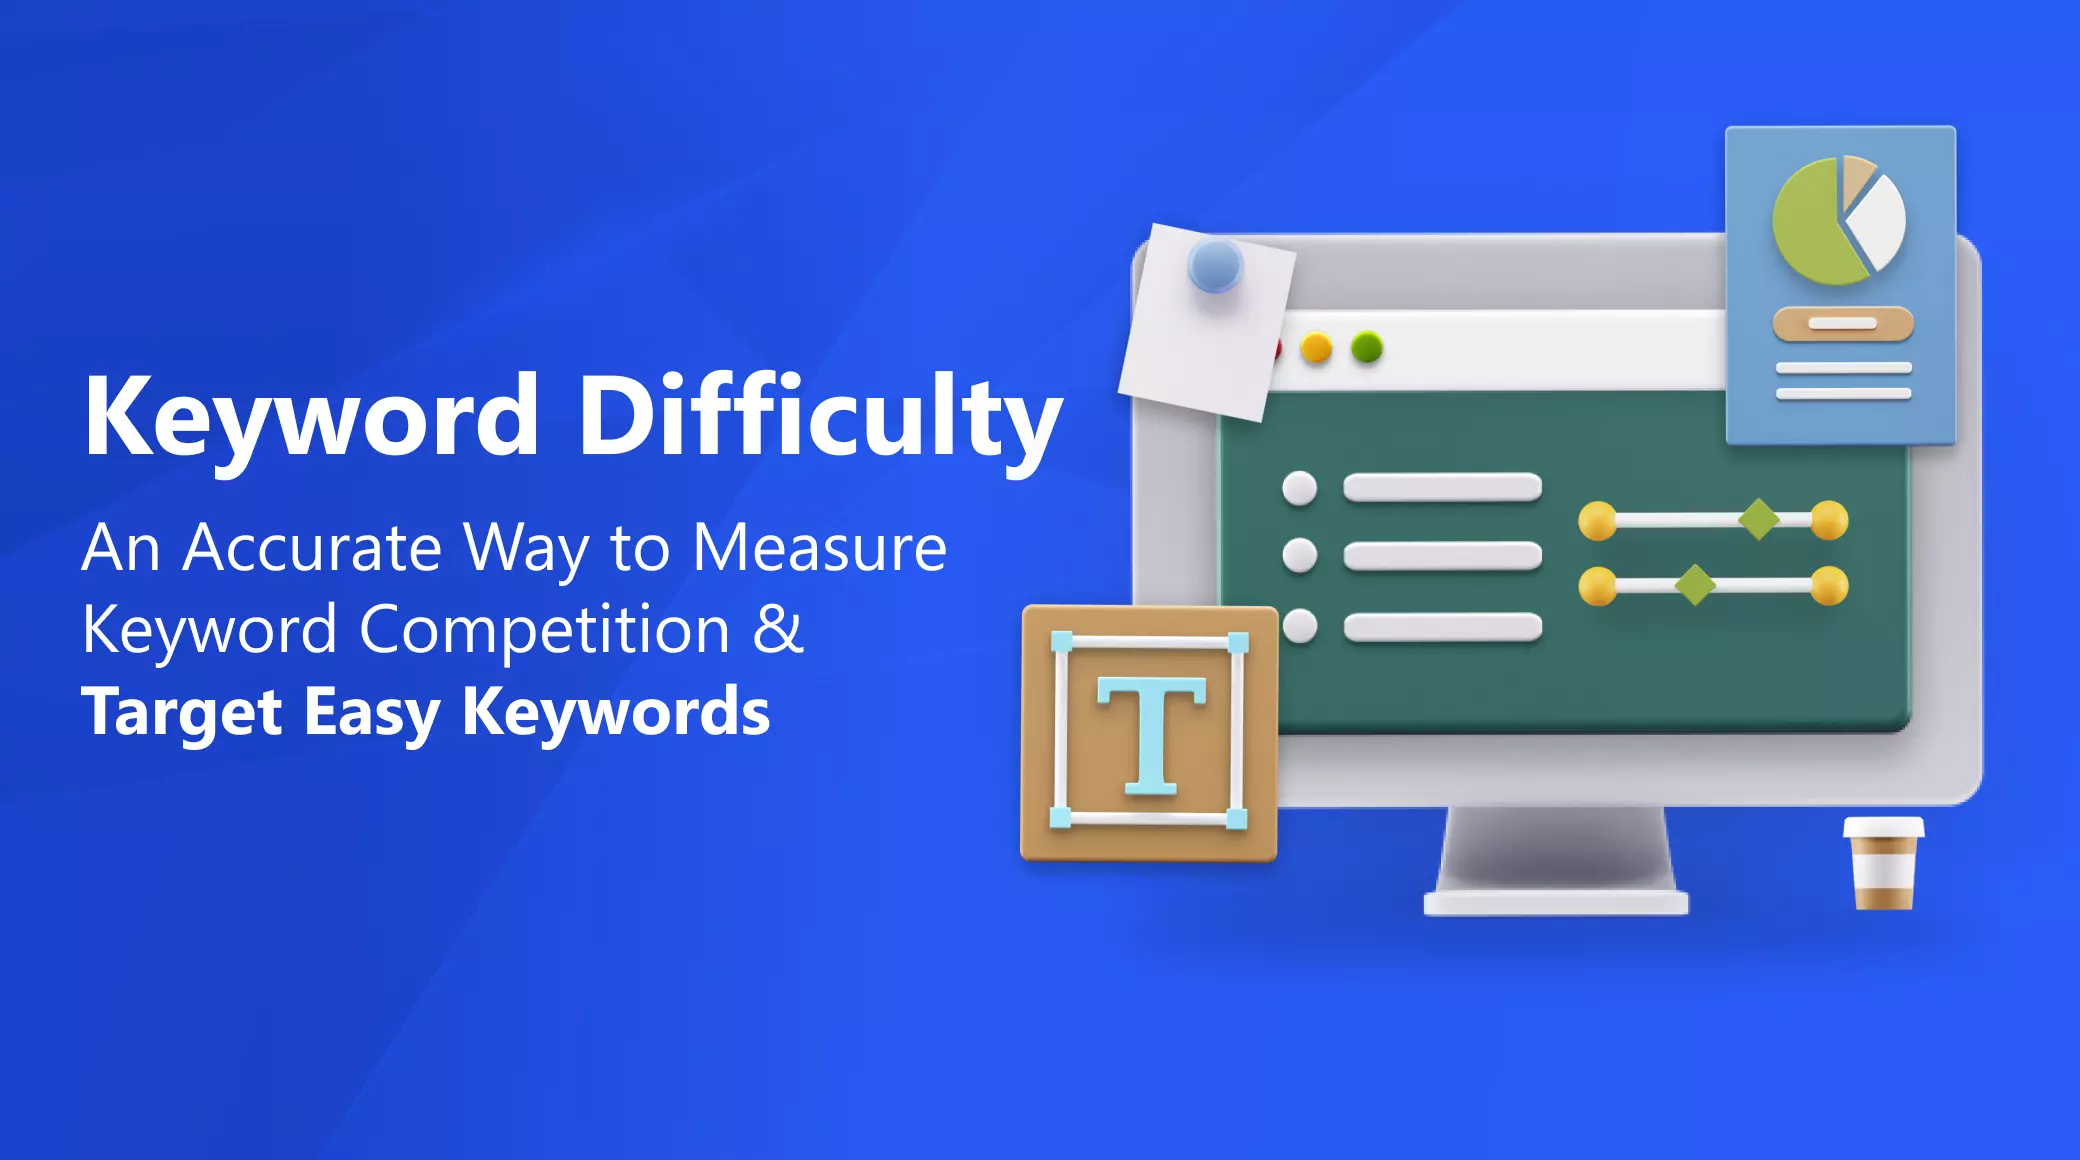 Keyword Difficulty: An Accurate Way to Measure Keyword Competition & Target Easy Keywords